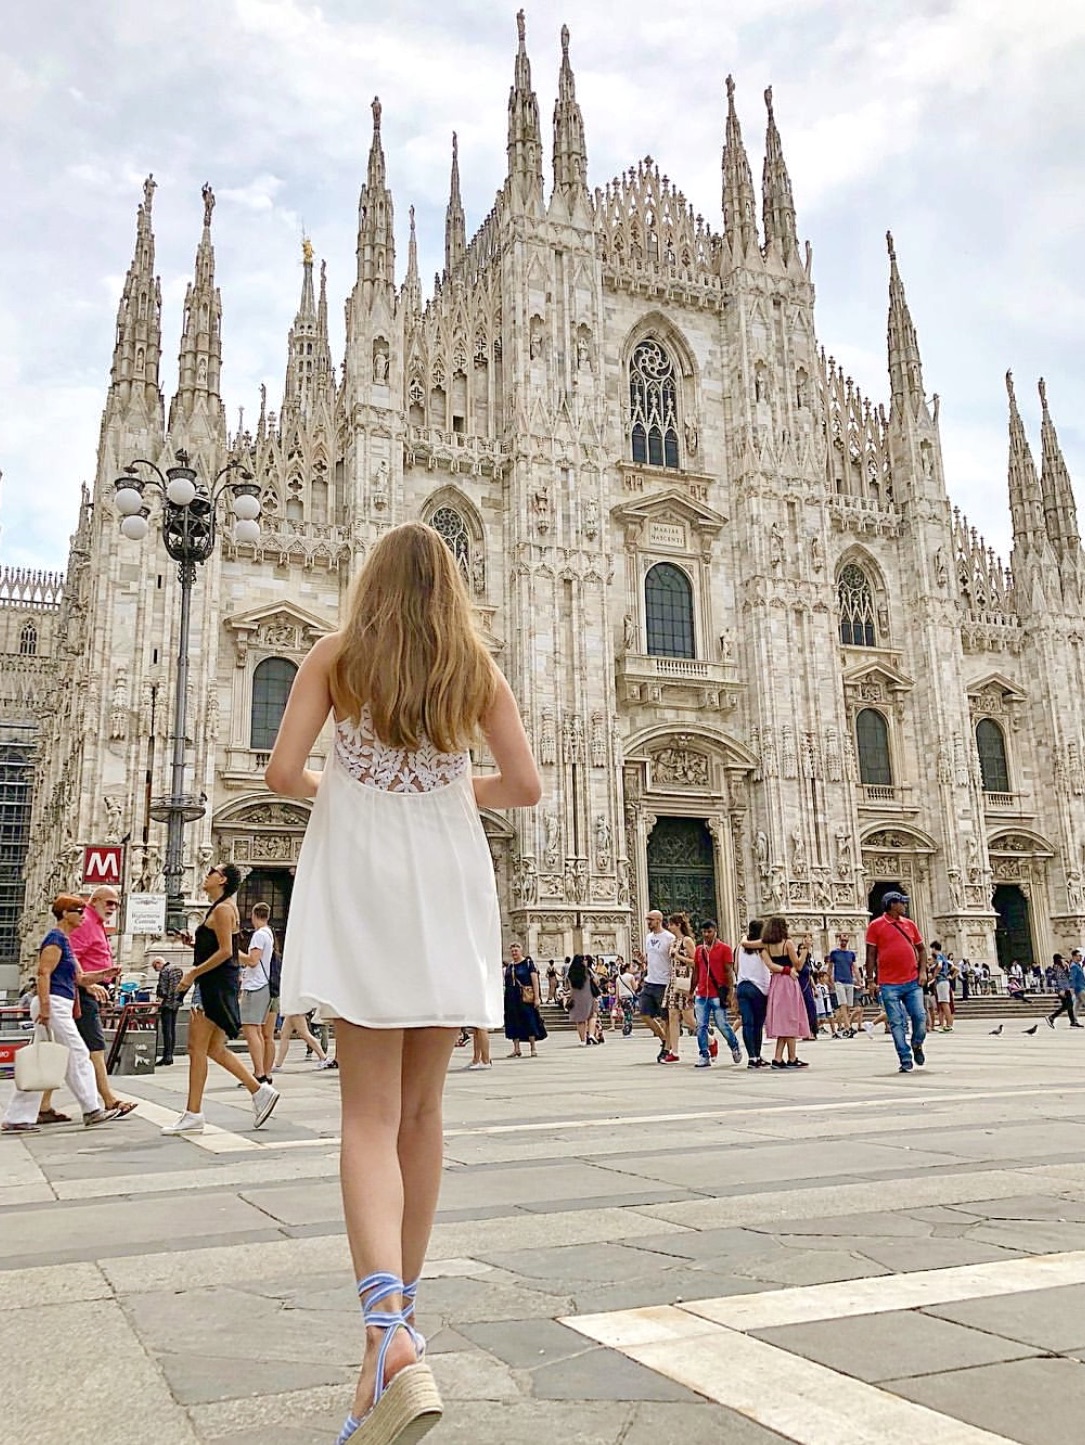 One of the most amazing places in Milan! | Trip.com Milan